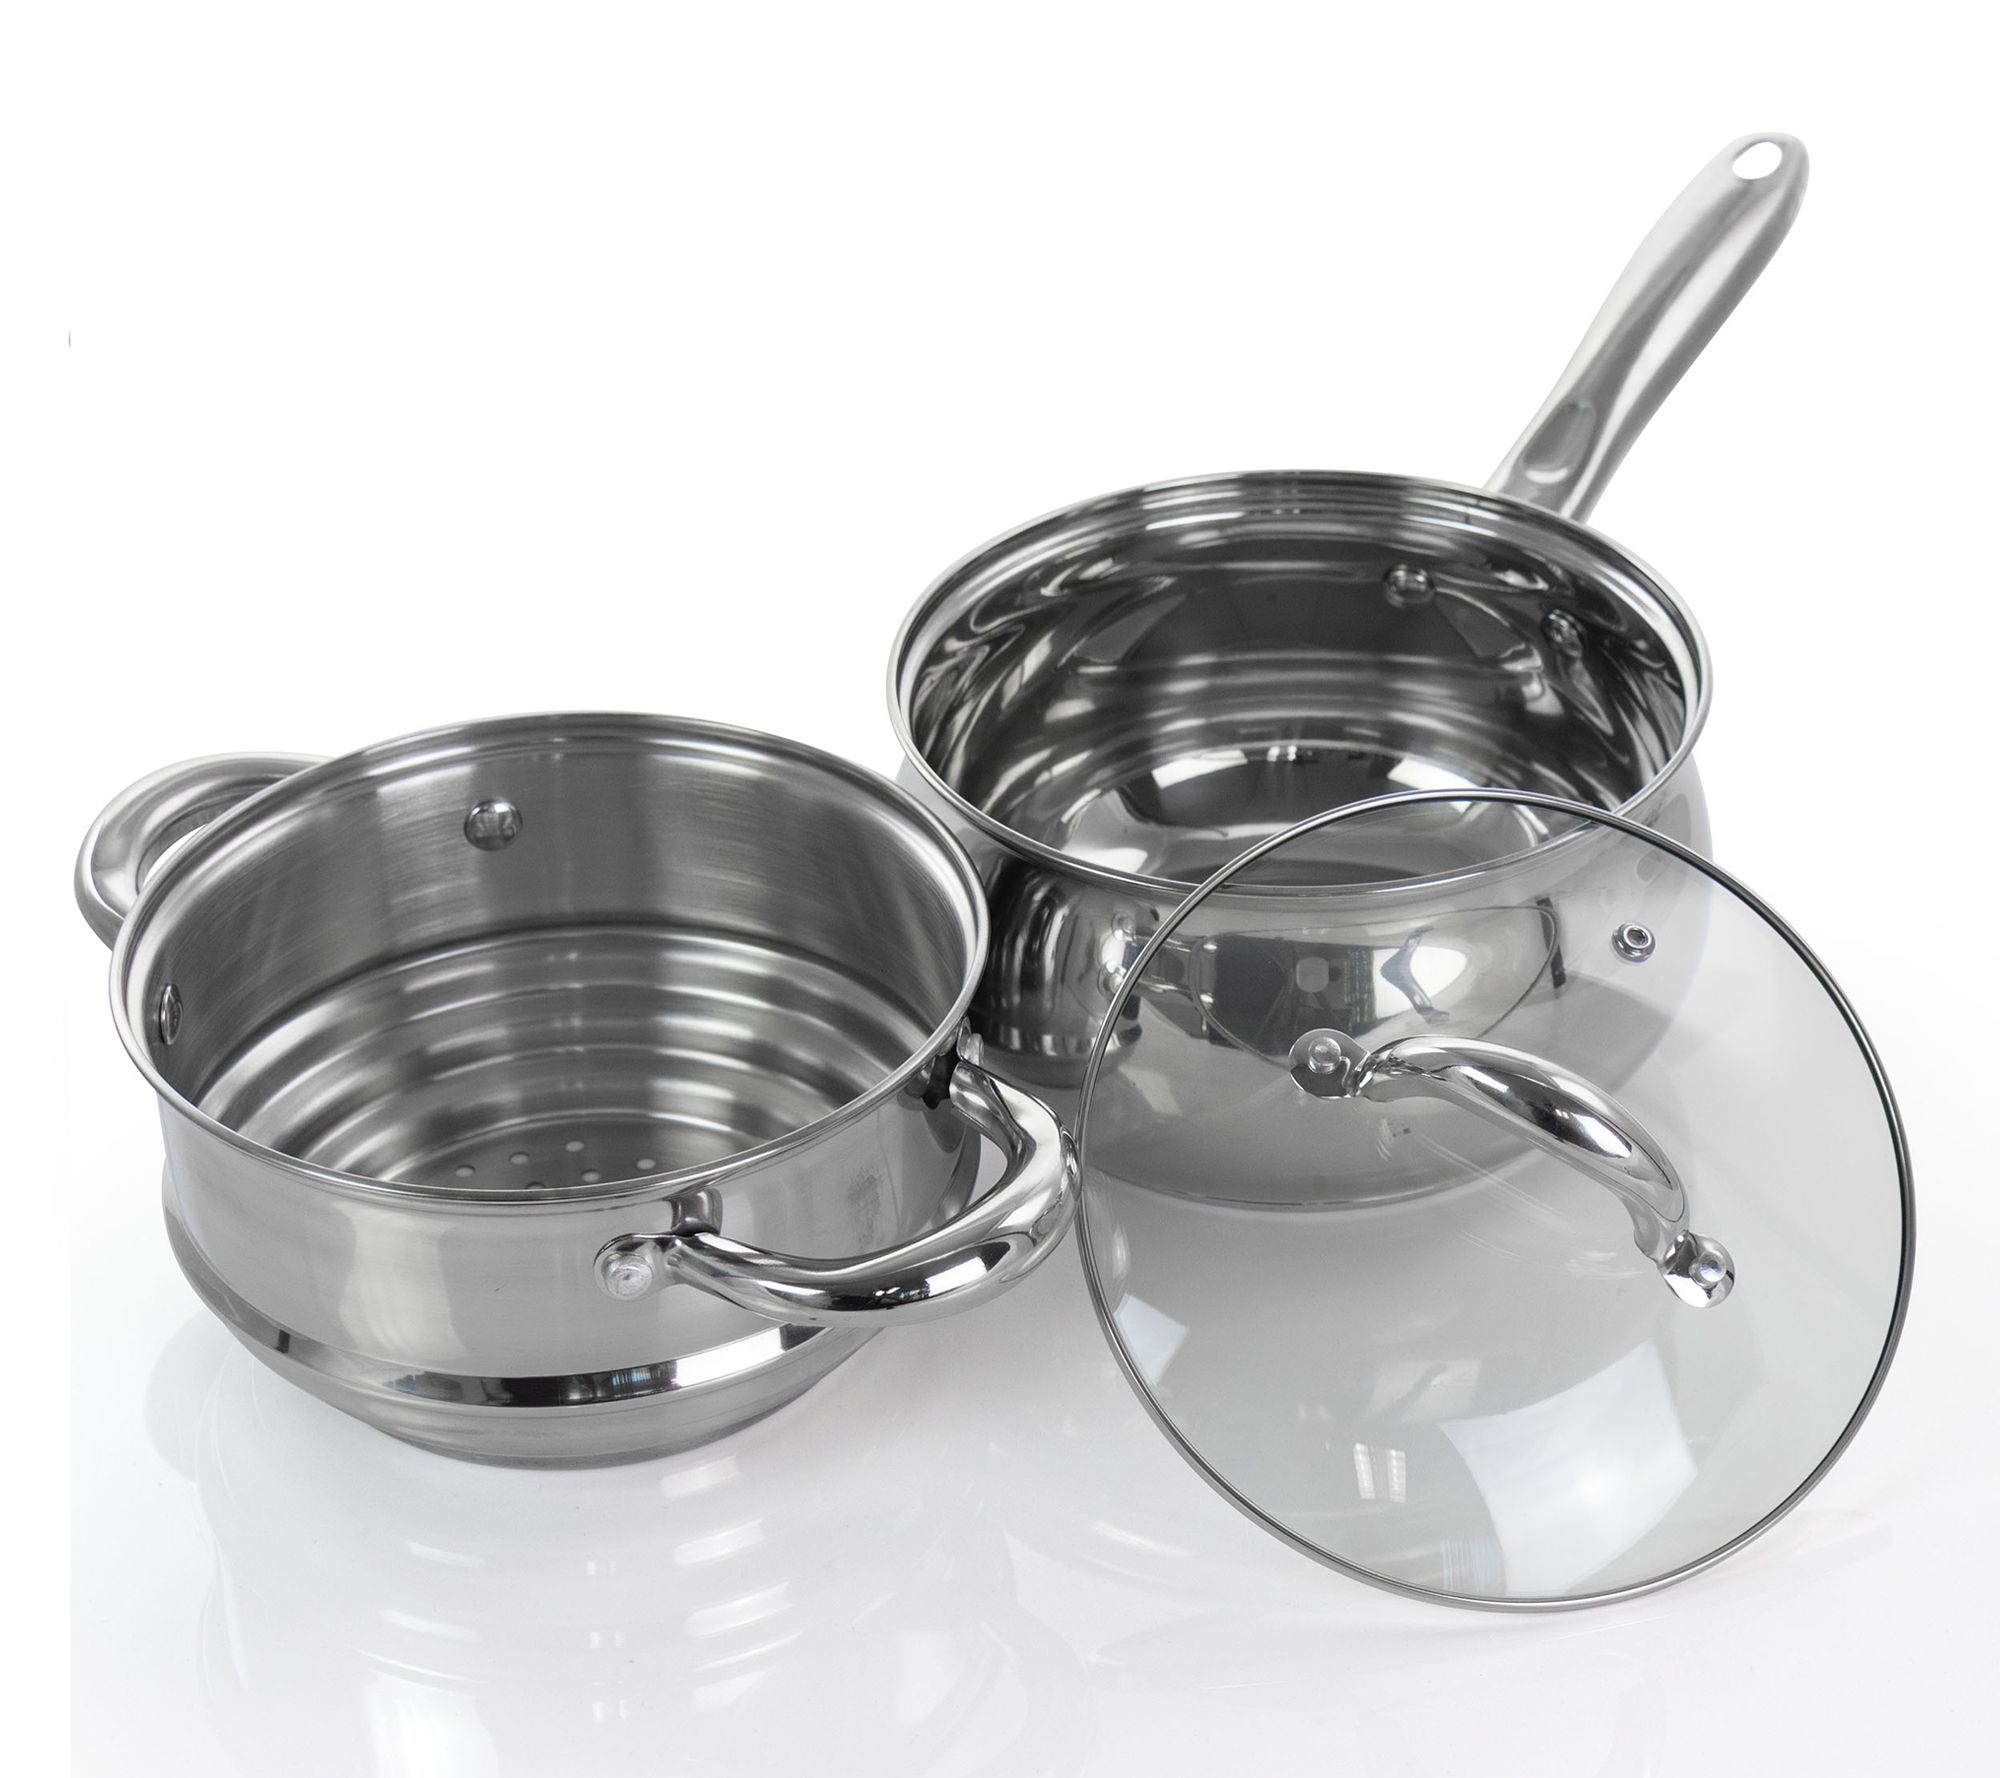 Gibson Abruzzo Stainless Steel 12 Piece Cookware Set